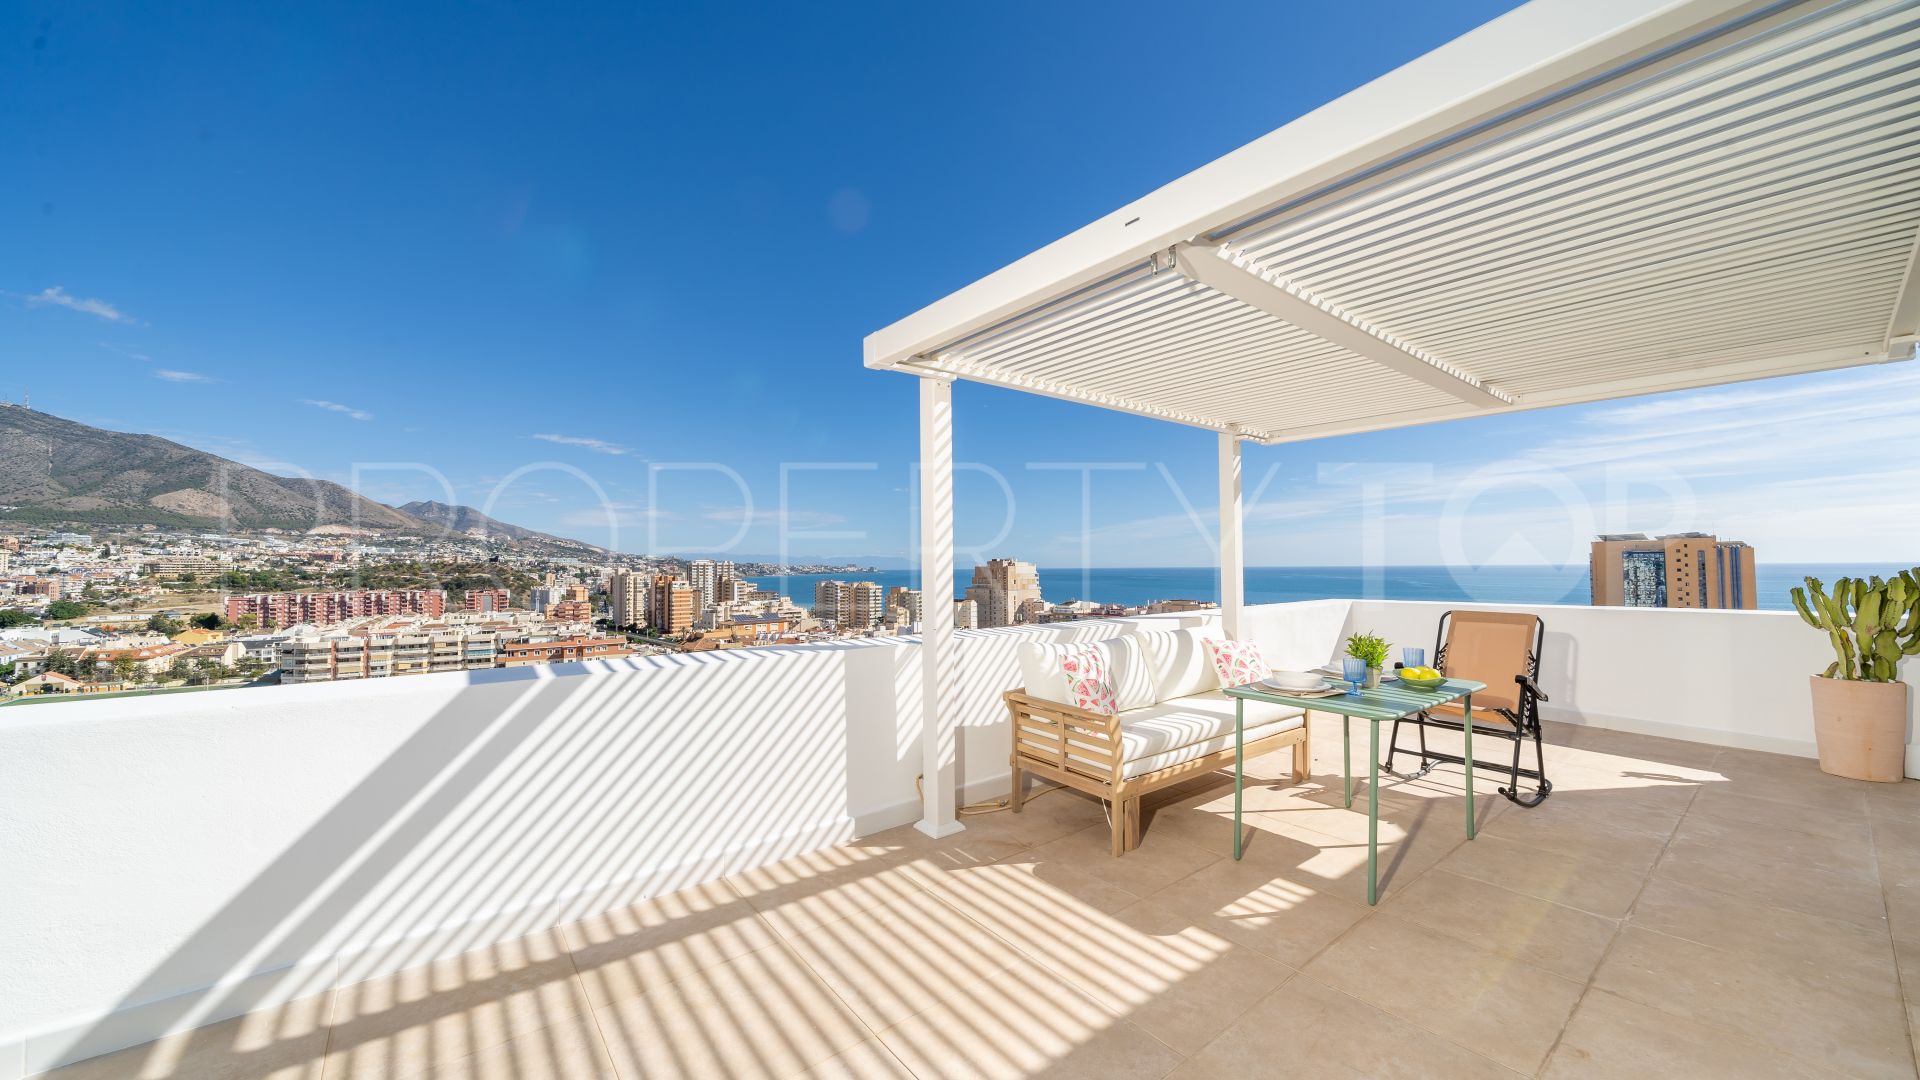 For sale Los Boliches 3 bedrooms duplex penthouse